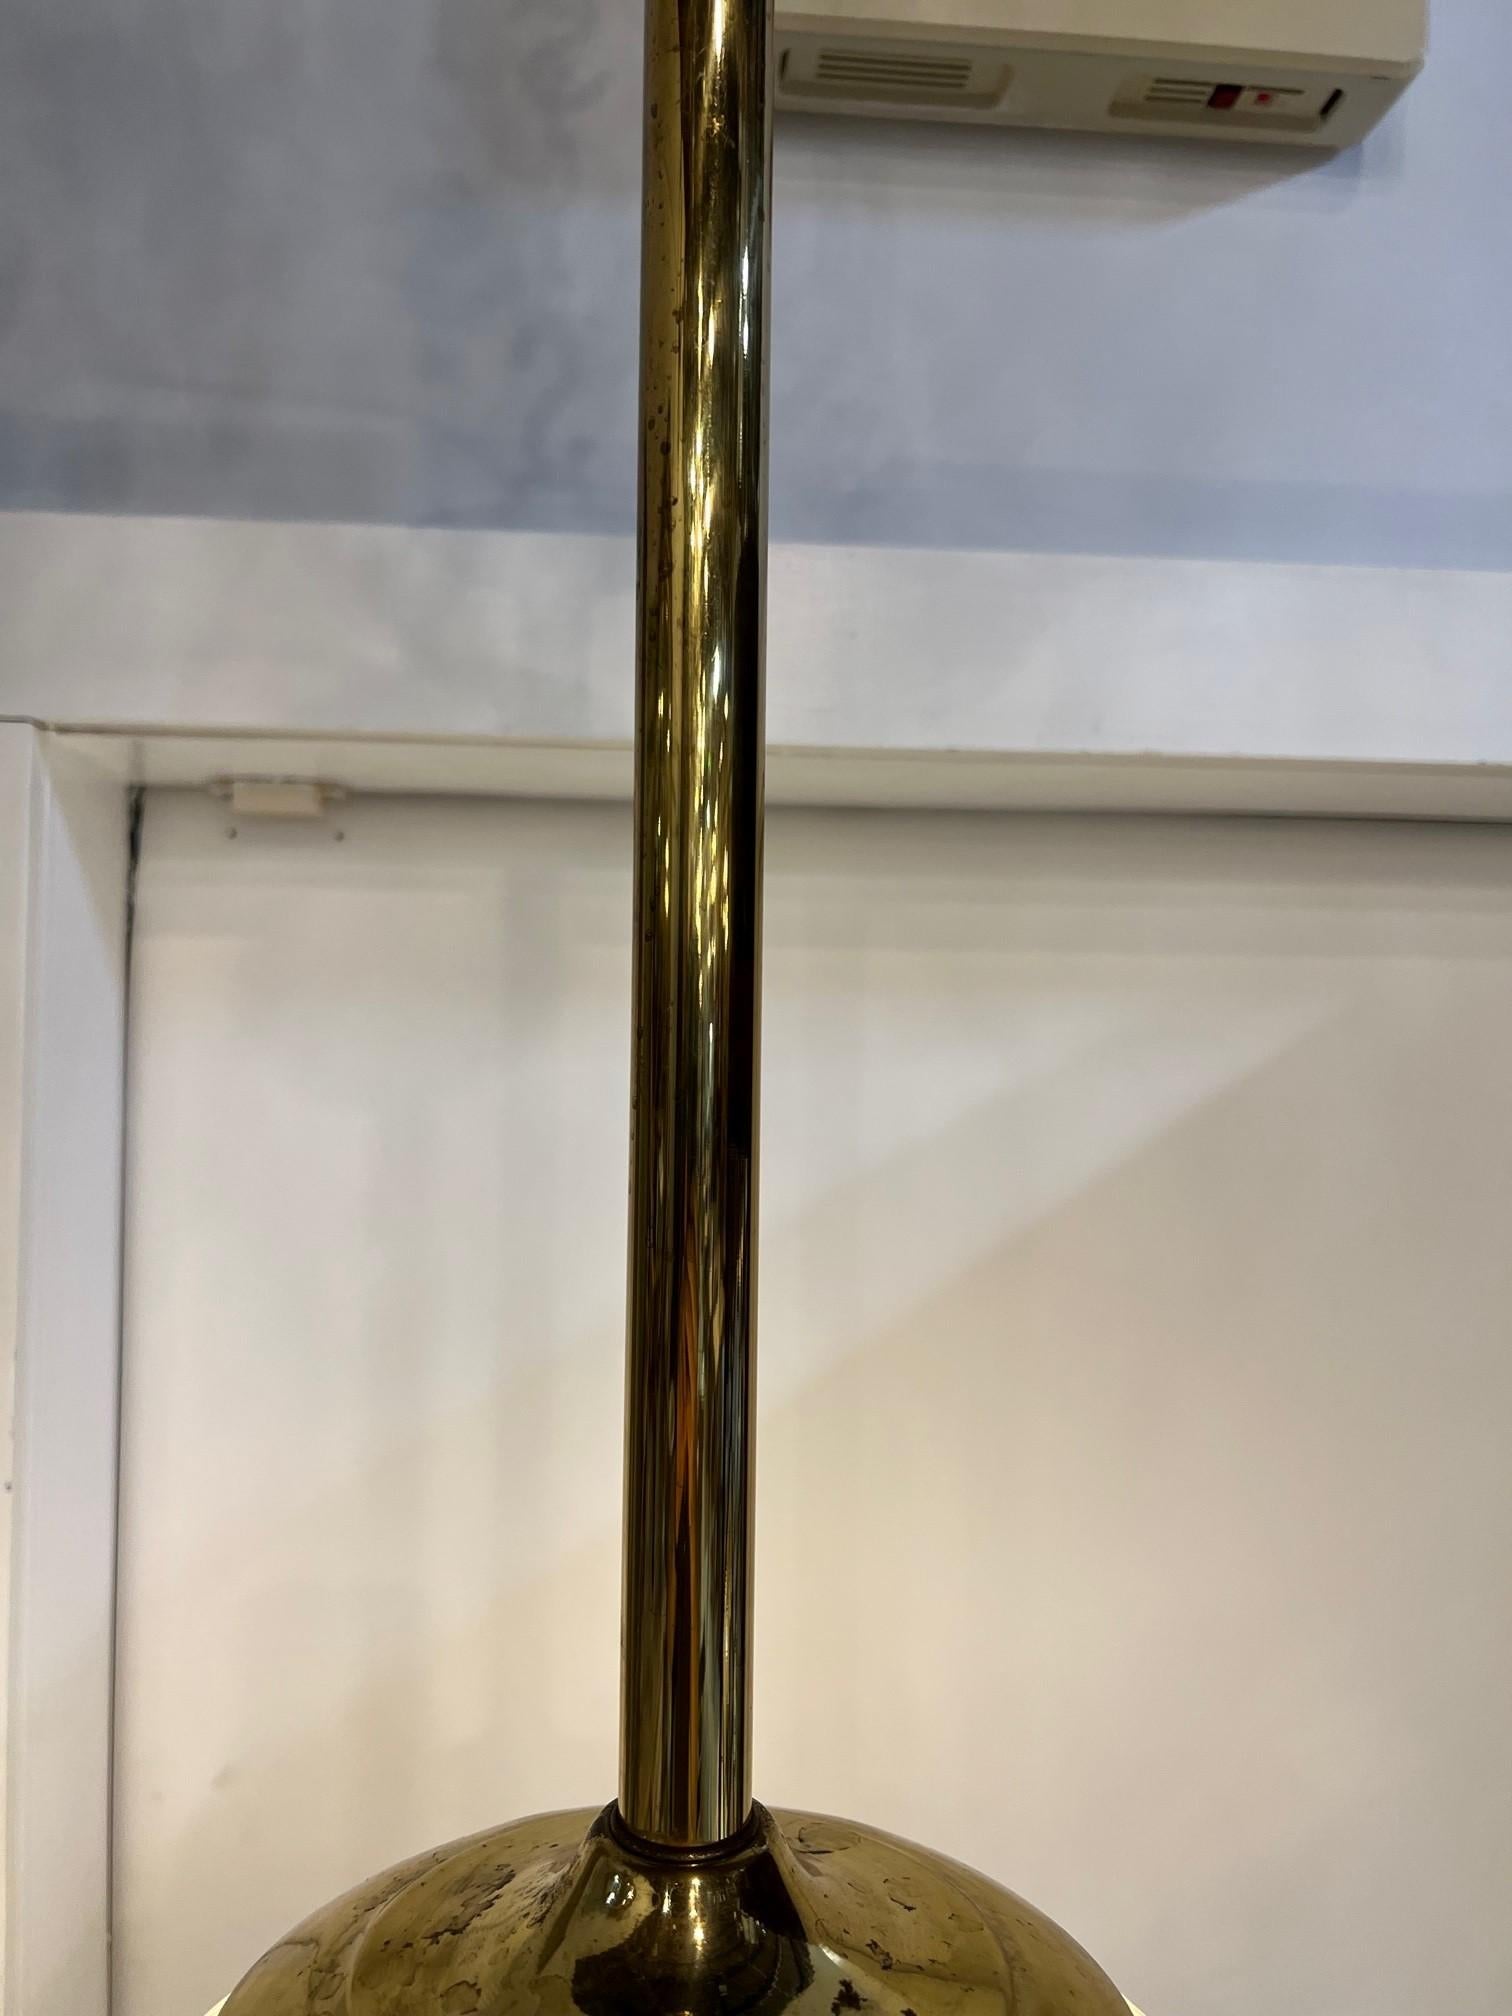 Seven Mid-20th Century Holophane Pyrex Glass Globe Pendant Light with Brass Pole In Good Condition For Sale In Stamford, CT